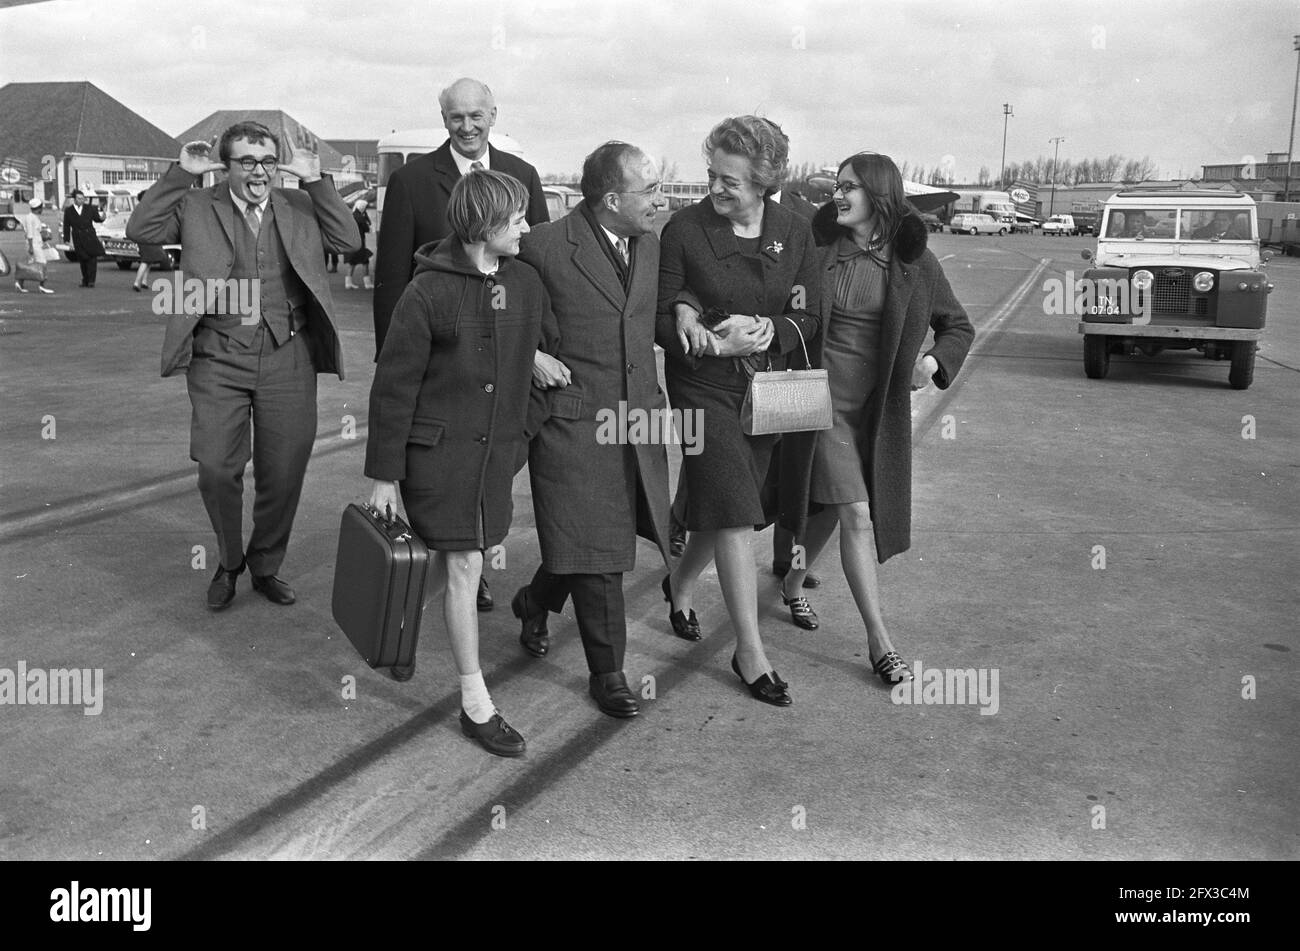 Minister Cals back from the West, Mr. Cals with wife, daughters and son, March 13, 1967, ETHANTS, SONS, arrivals, daughters, ministers, The Netherlands, 20th century press agency photo, news to remember, documentary, historic photography 1945-1990, visual stories, human history of the Twentieth Century, capturing moments in time Stock Photo